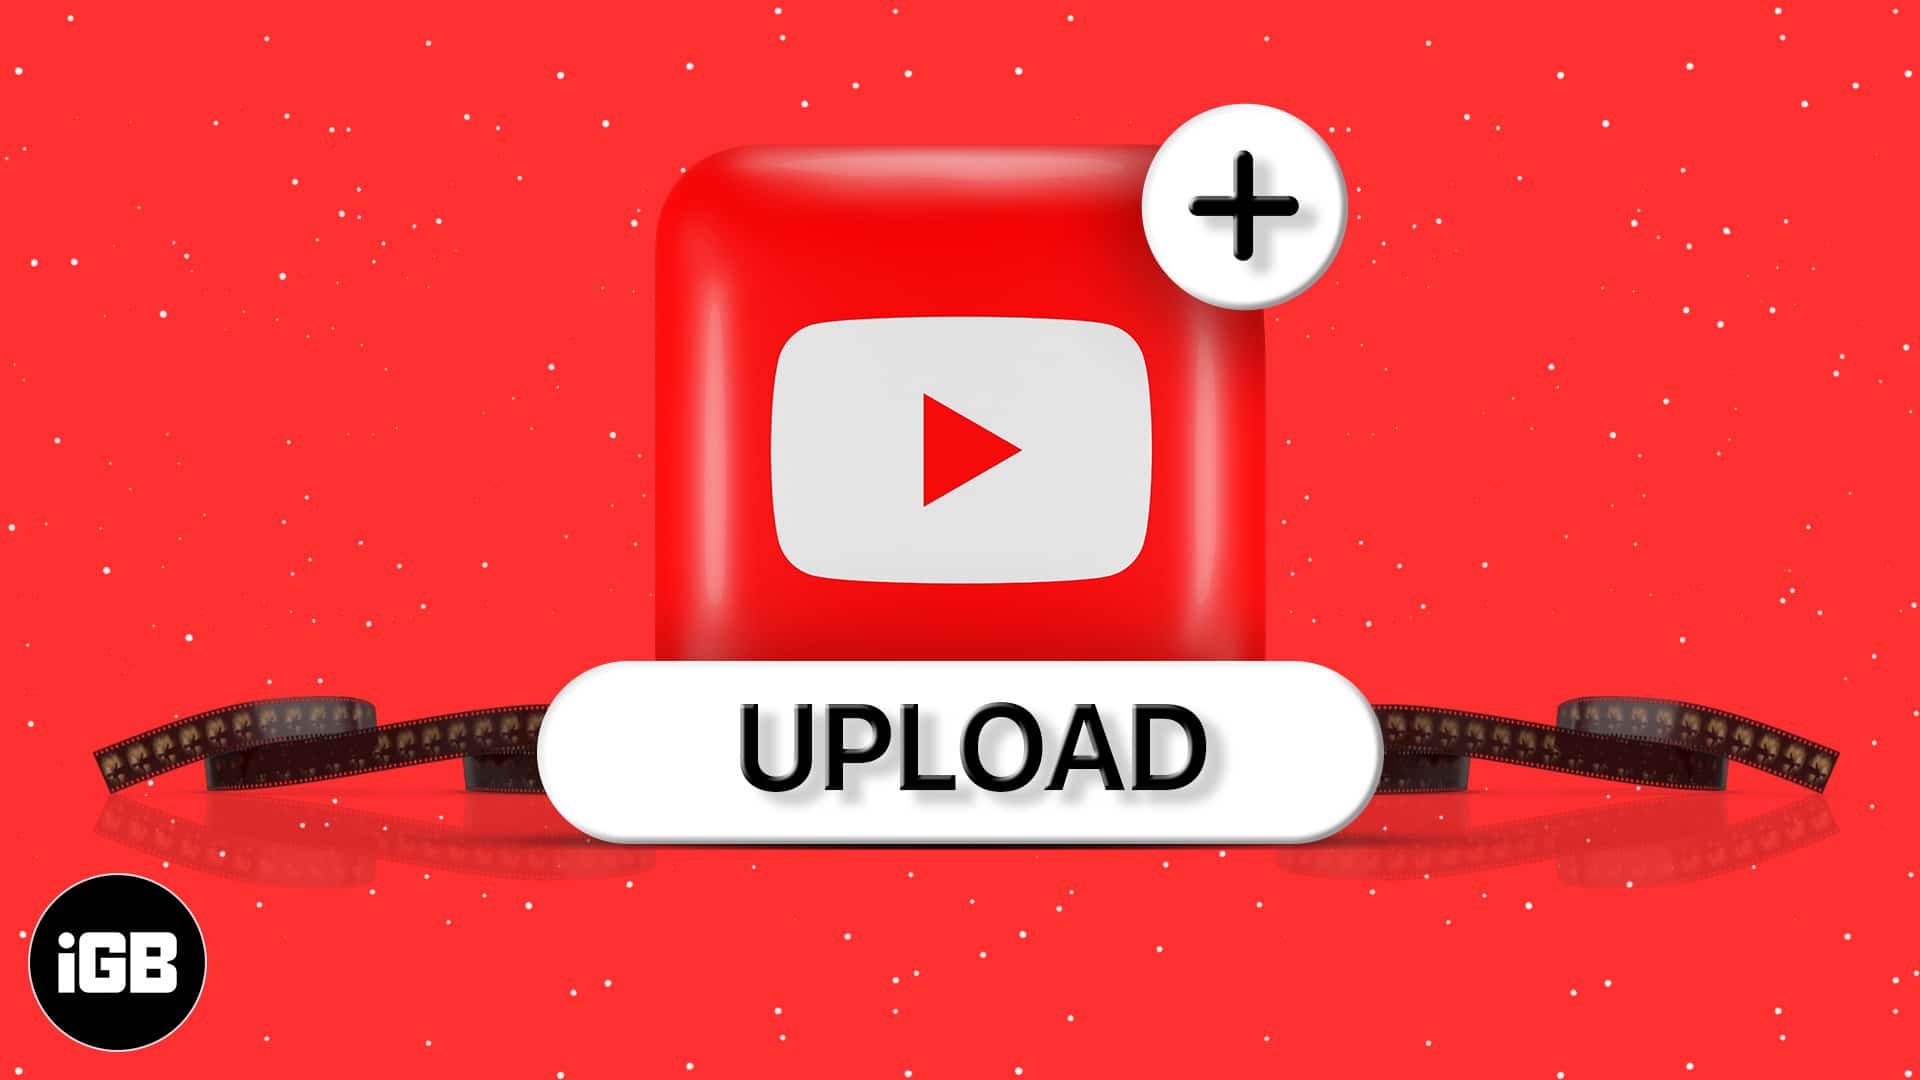 How to upload videos to YouTube from iPhone or iPad